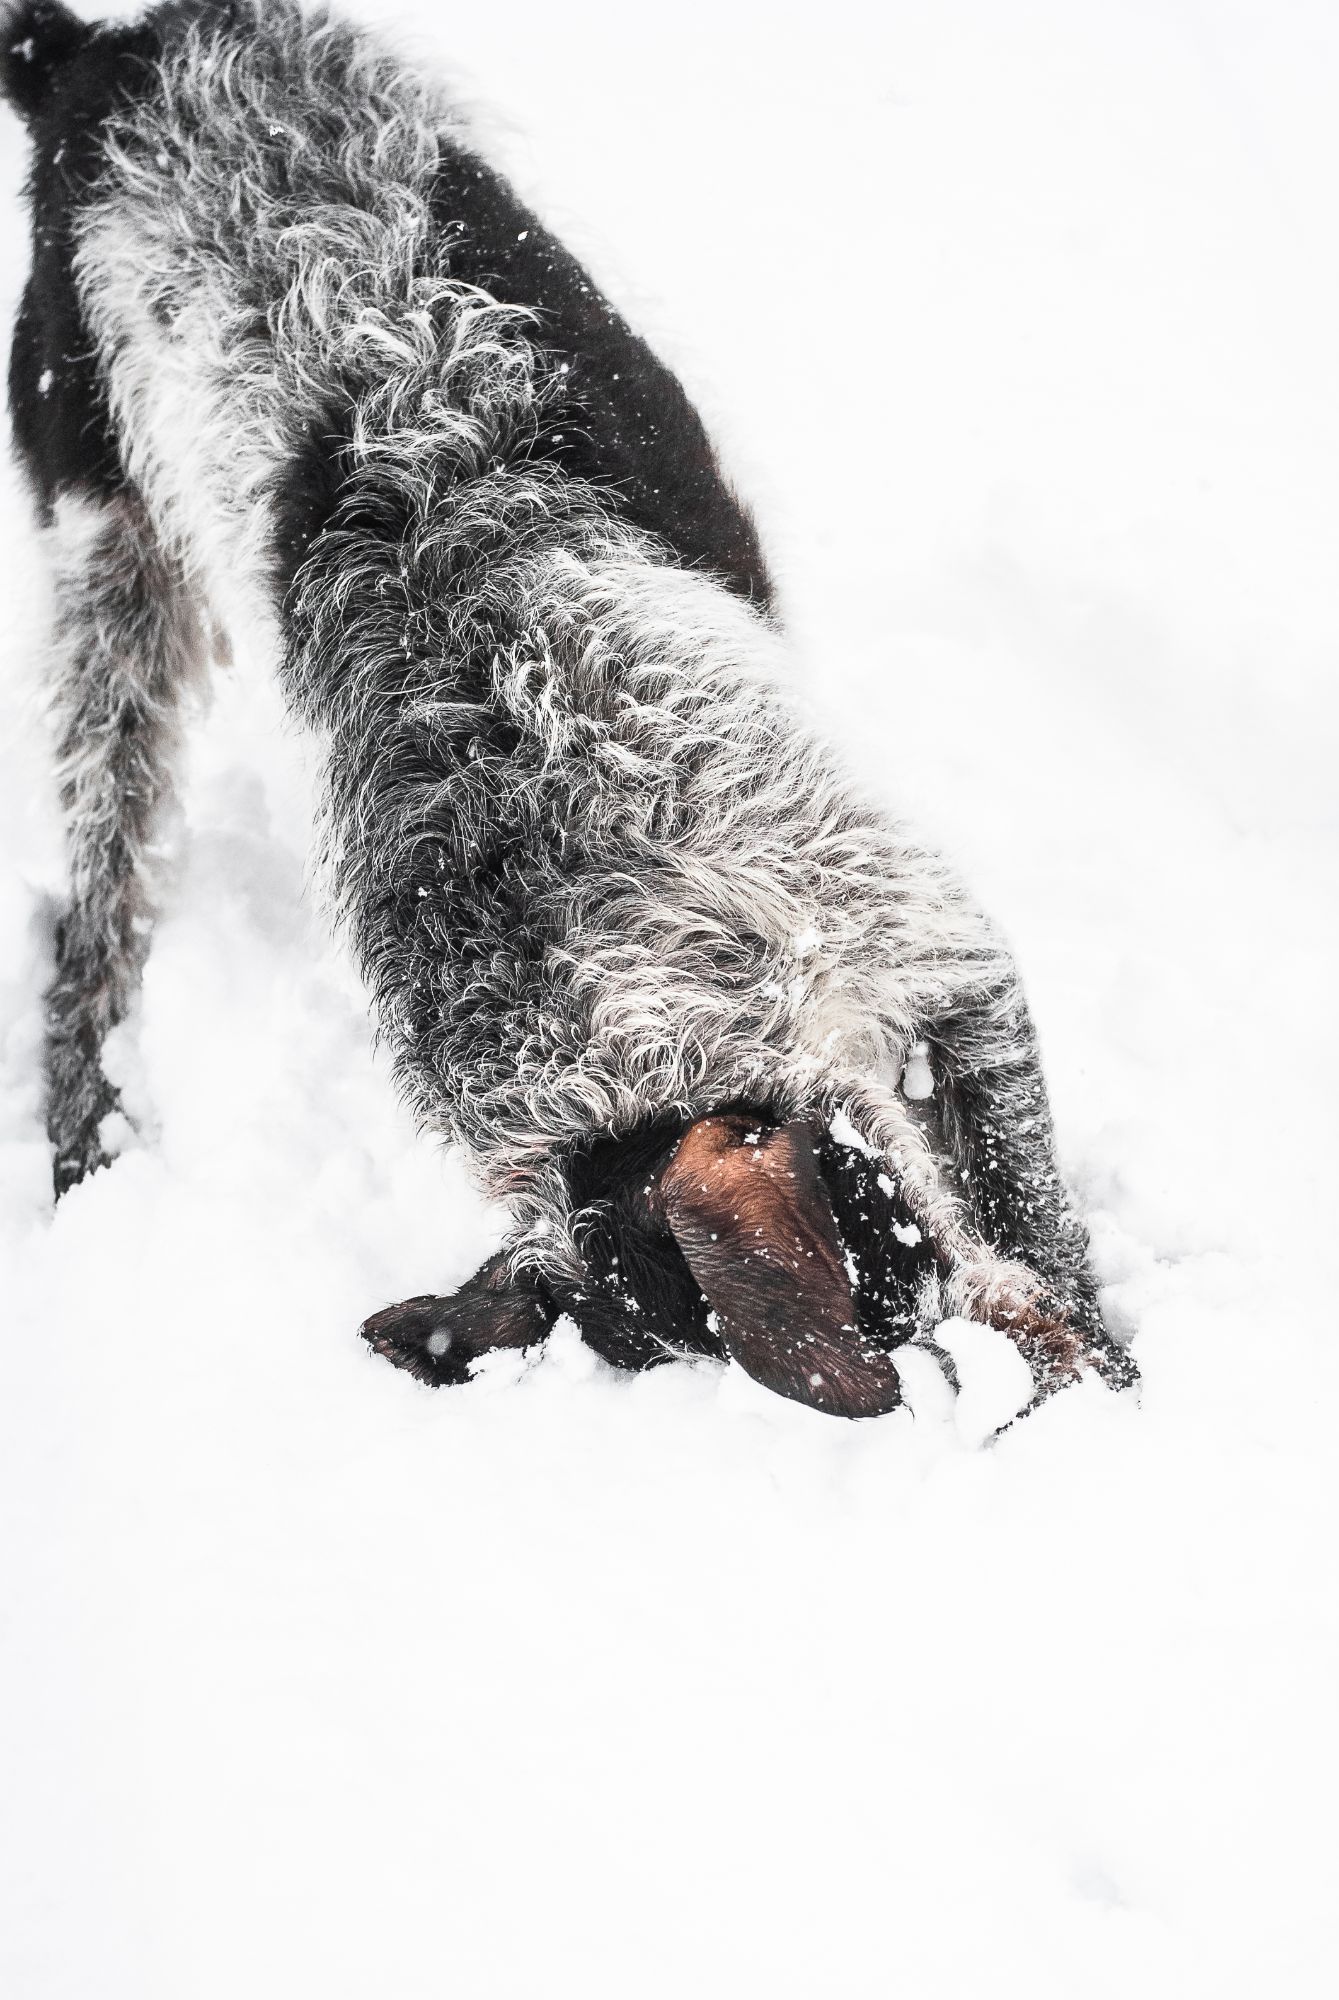 A german wirehaired pointer is photographed in the snow. She's rubbing her head in the snow and all you can see is he body and bent head with two ears flopped over the snow pile.